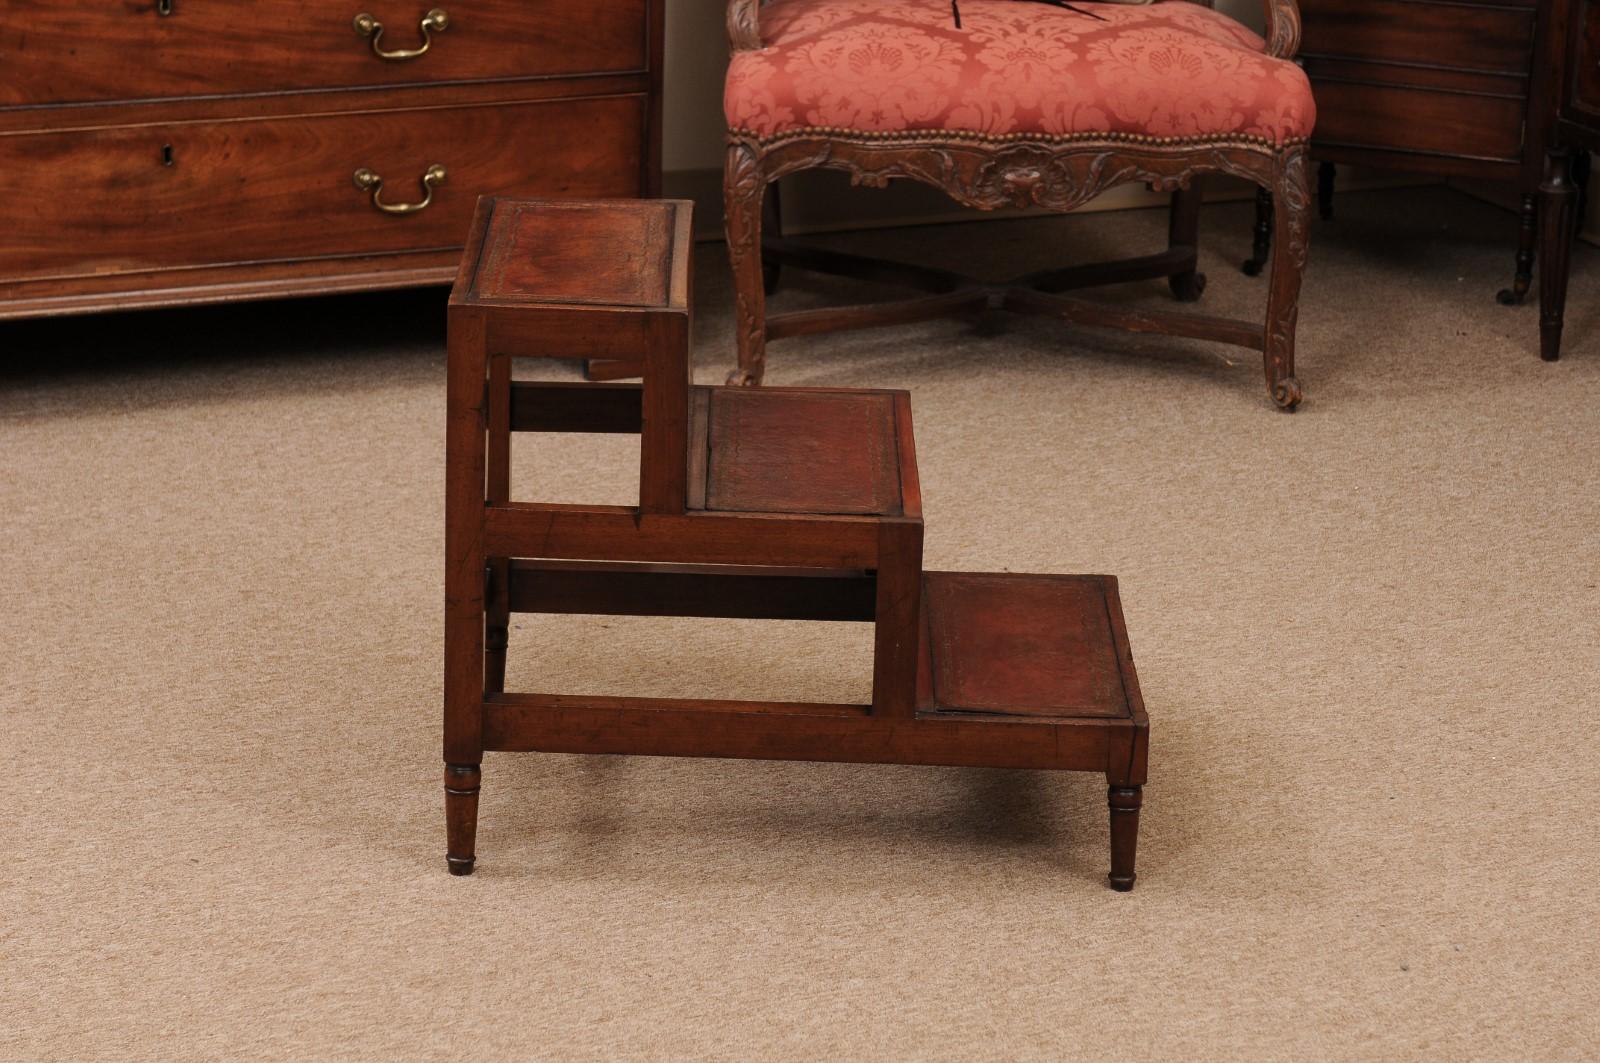 Early 19th Century English Mahogany Library Steps with Embossed Brown Leather and Turned Legs